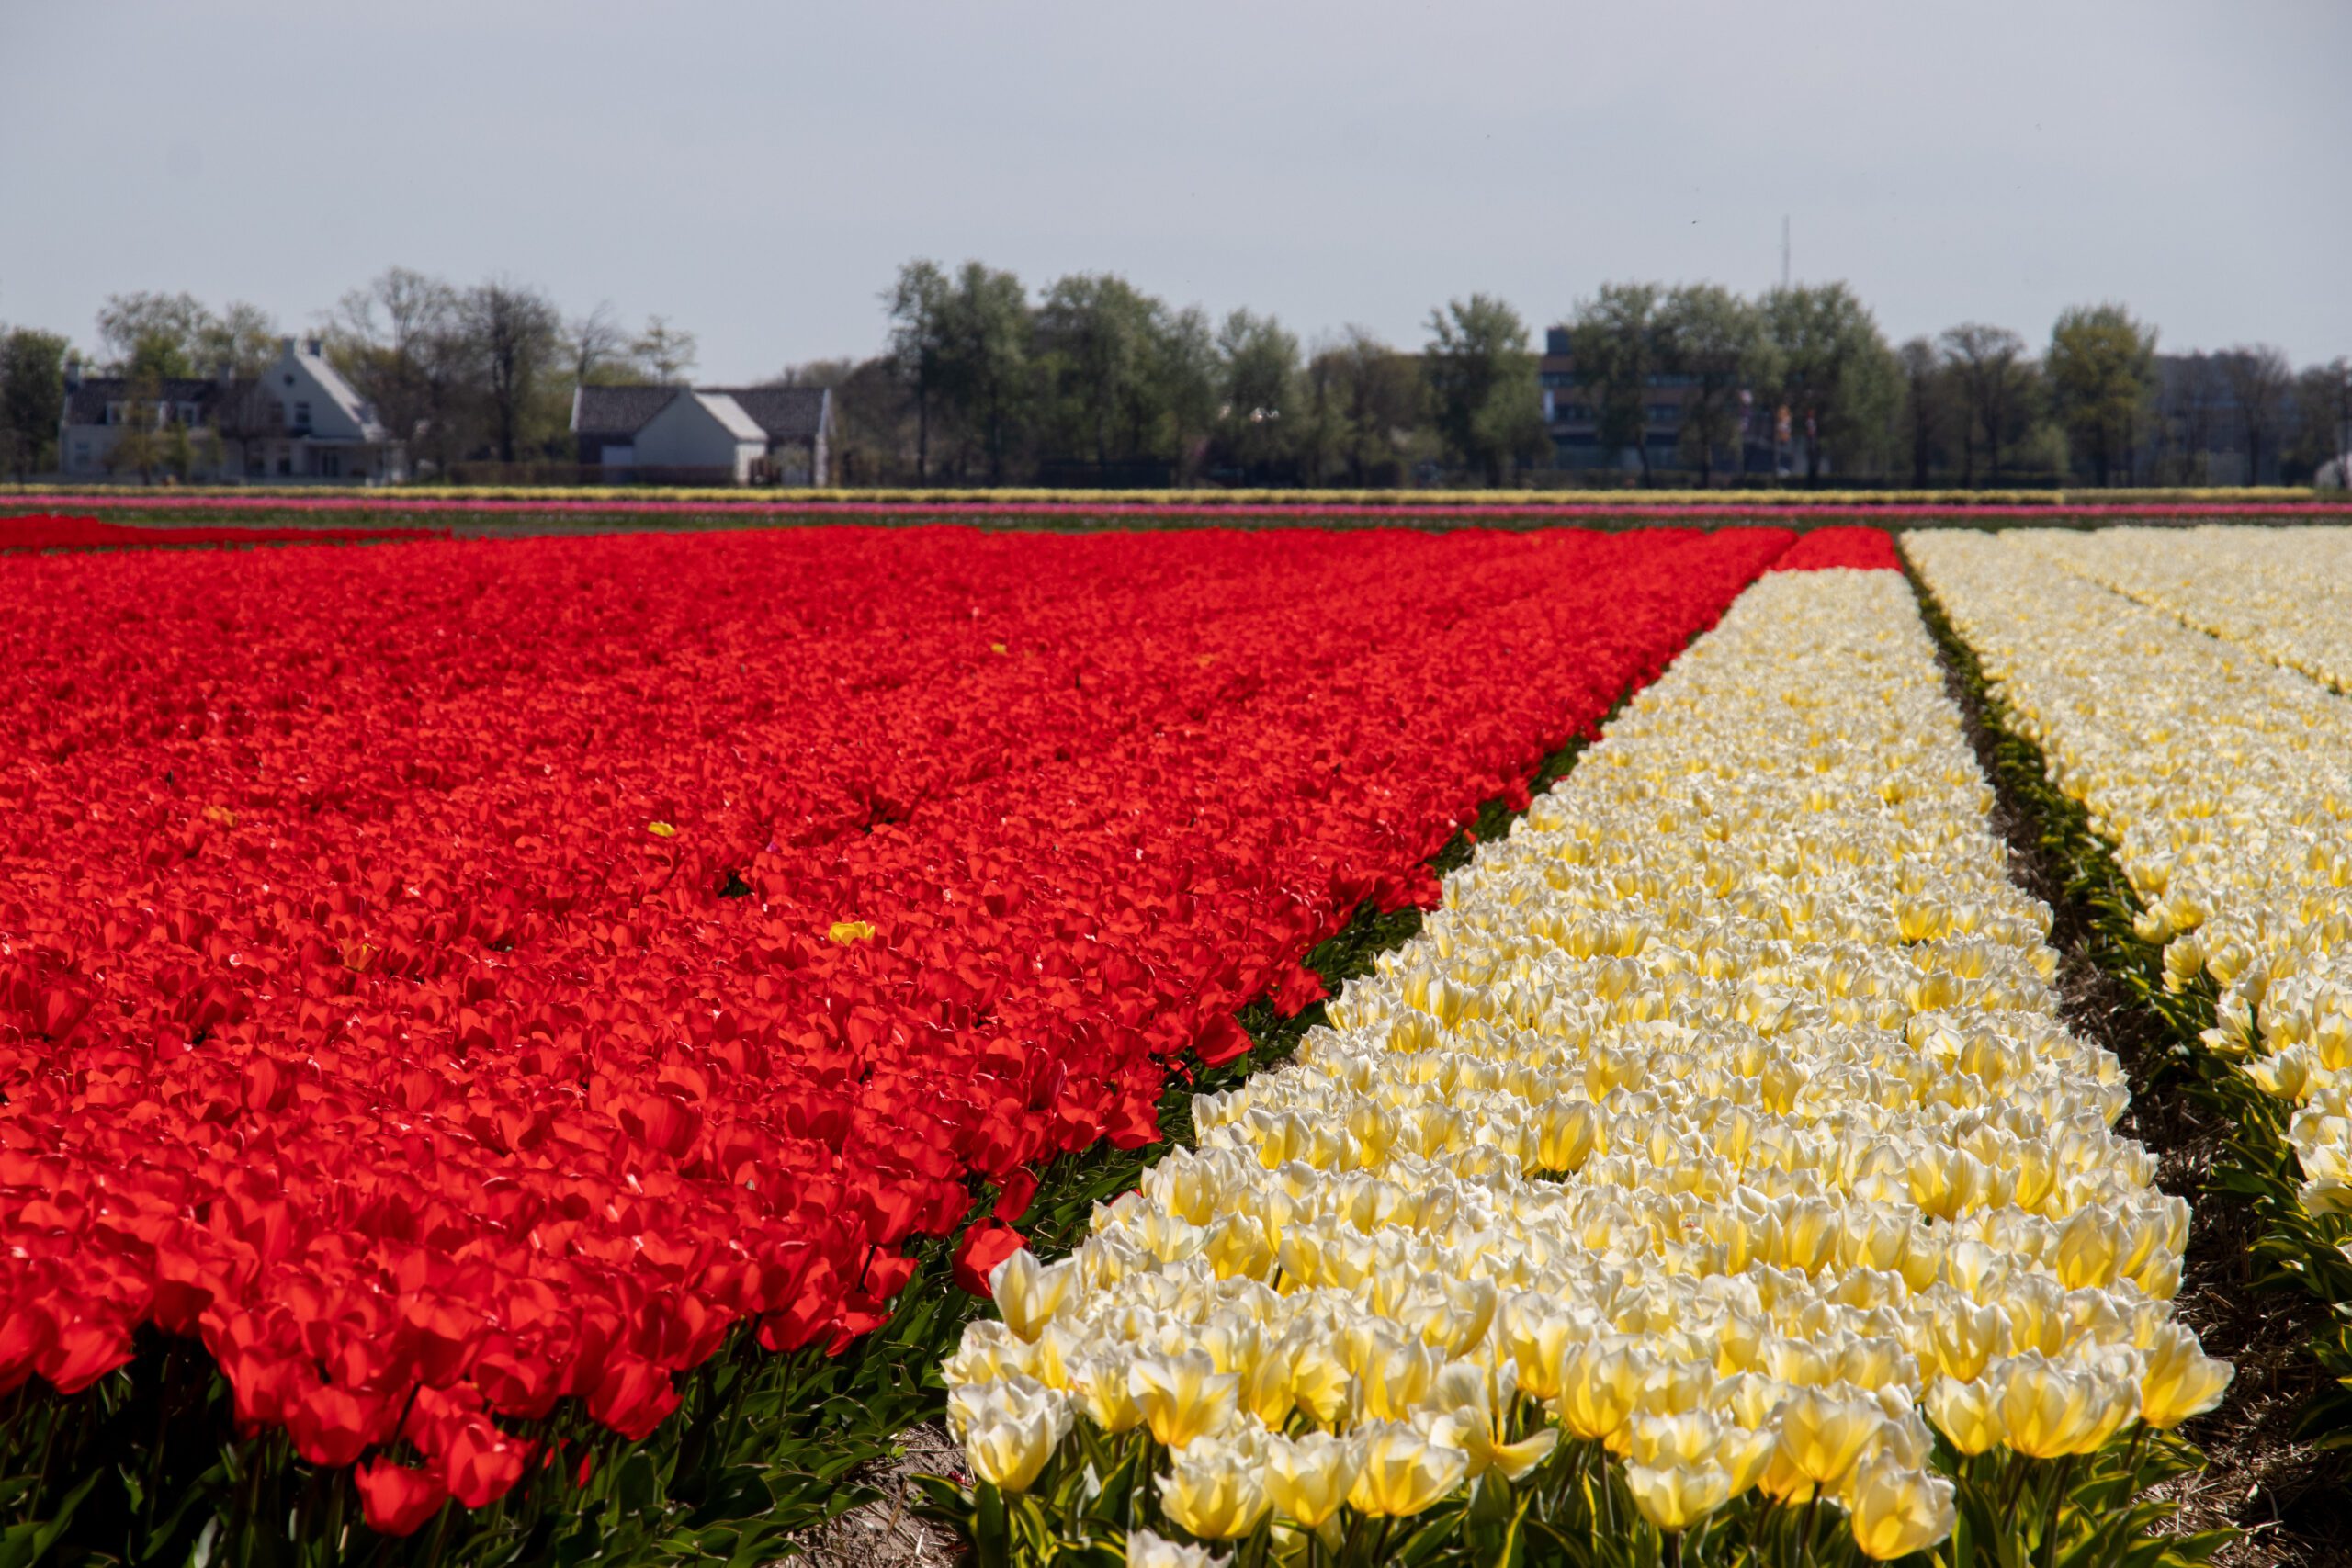 Fields of red and yellow tulips